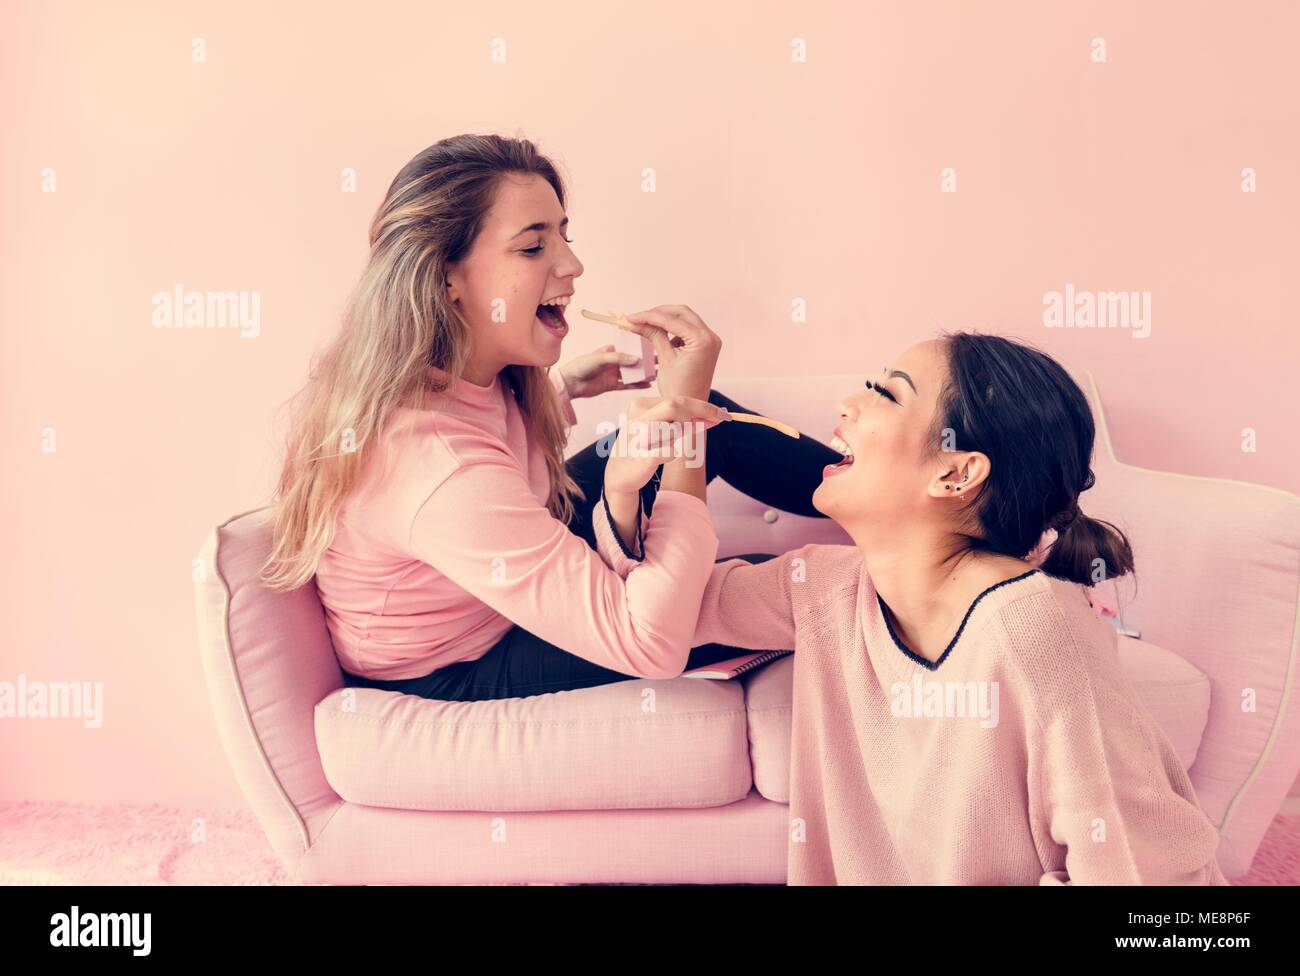 Women sitting feeding fries each other with pink background Stock Photo